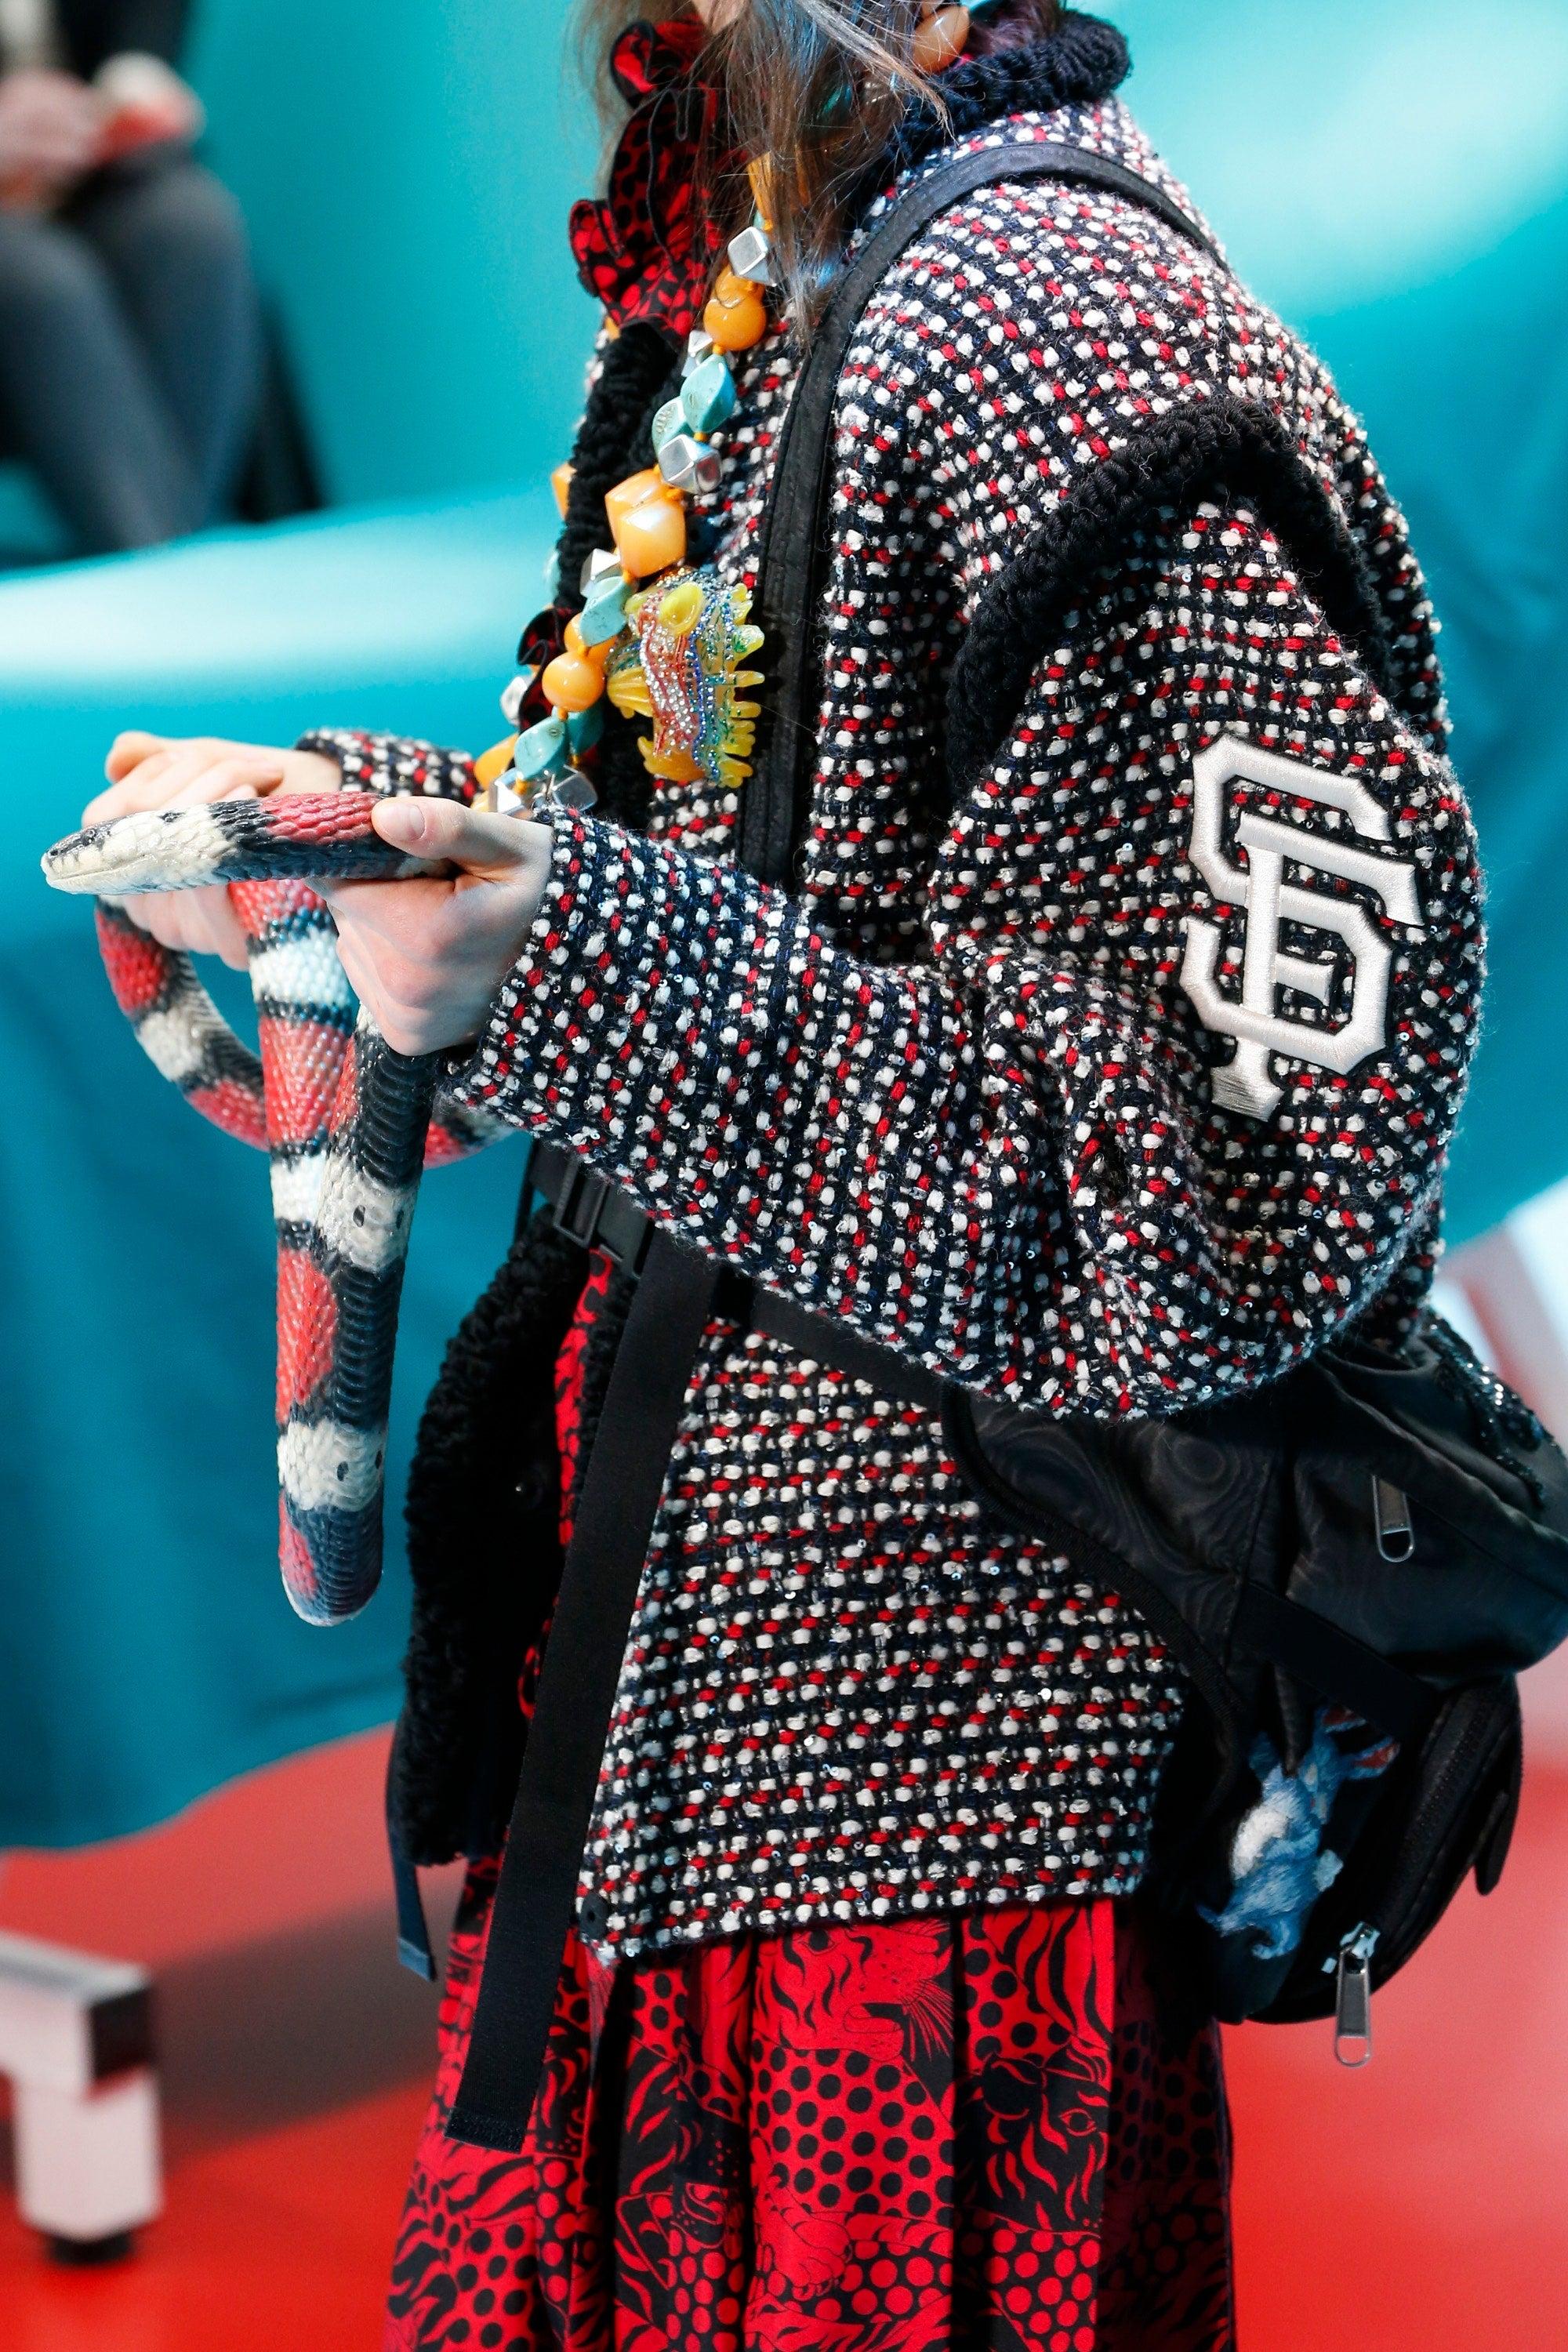 GUCCI X MLB Fall 2018 Giants jacket comes in navy, cream and red polyamide sequined woven material featuring an oversized style, sewn SF Giants™ emblem, round neck, two slip pockets and a snap button closure. Made in Italy. New with Tags. 

Marked: 